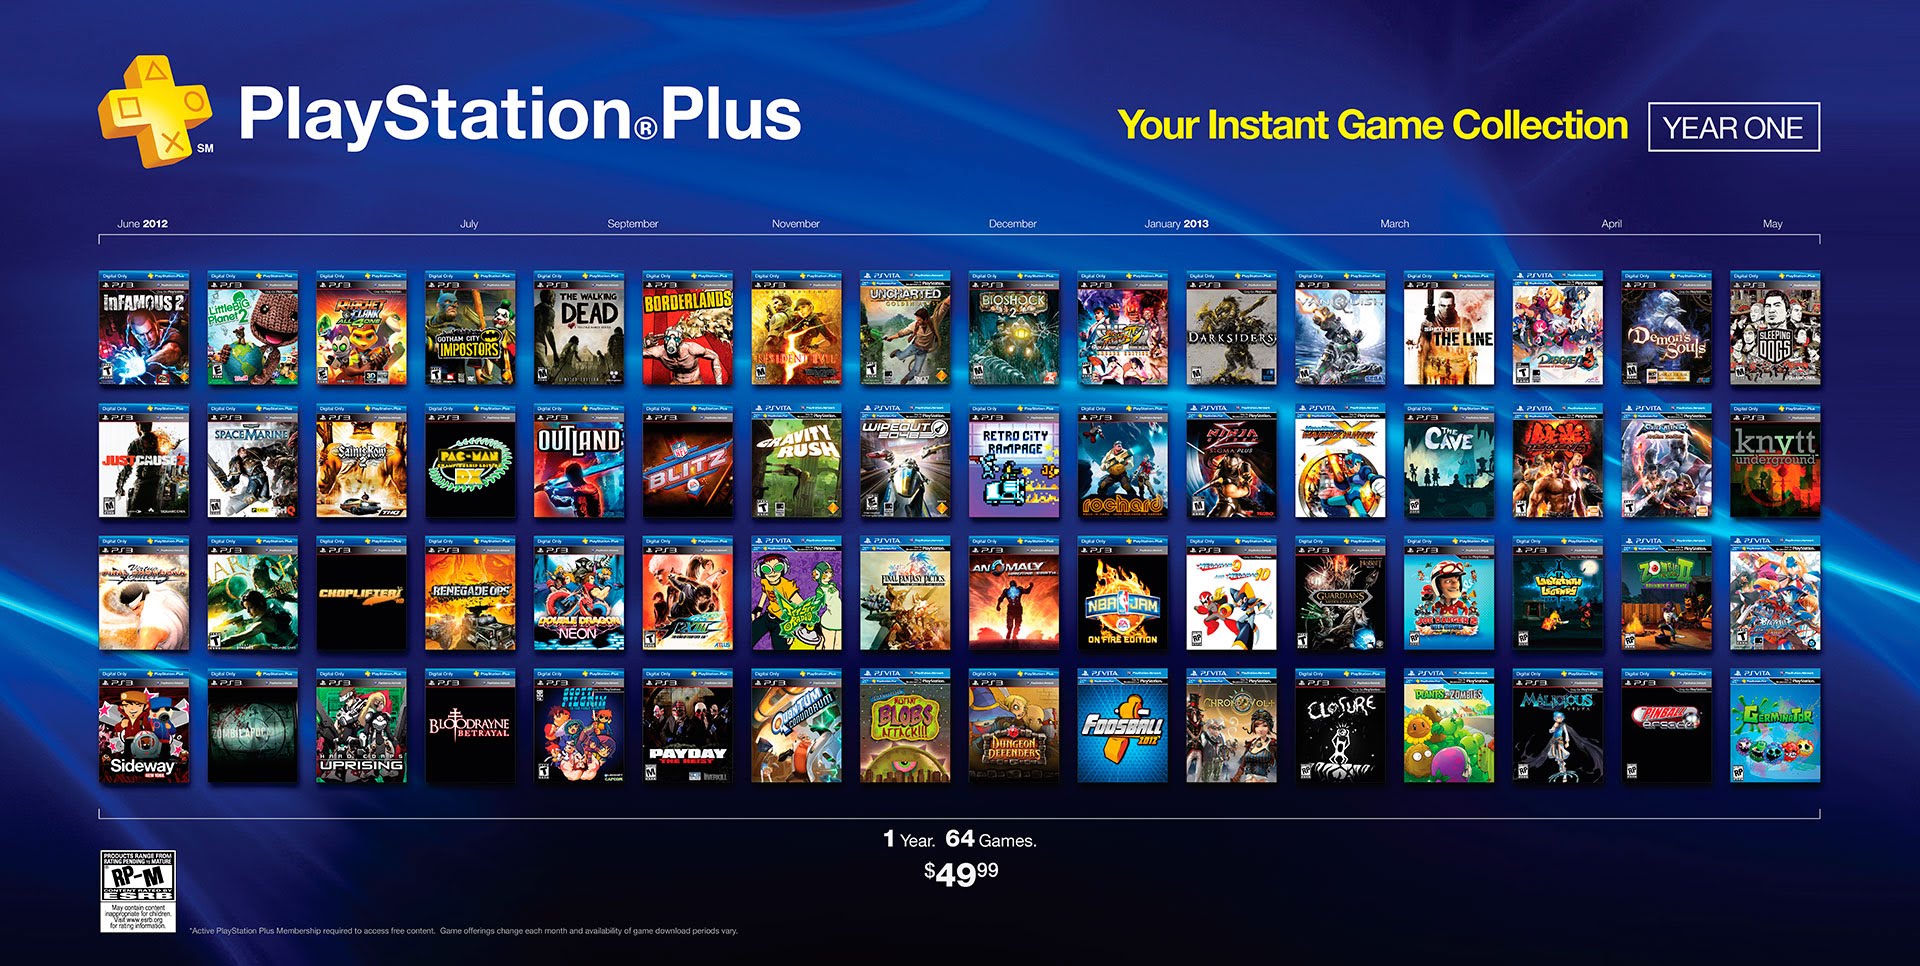 where to get cheap ps4 games